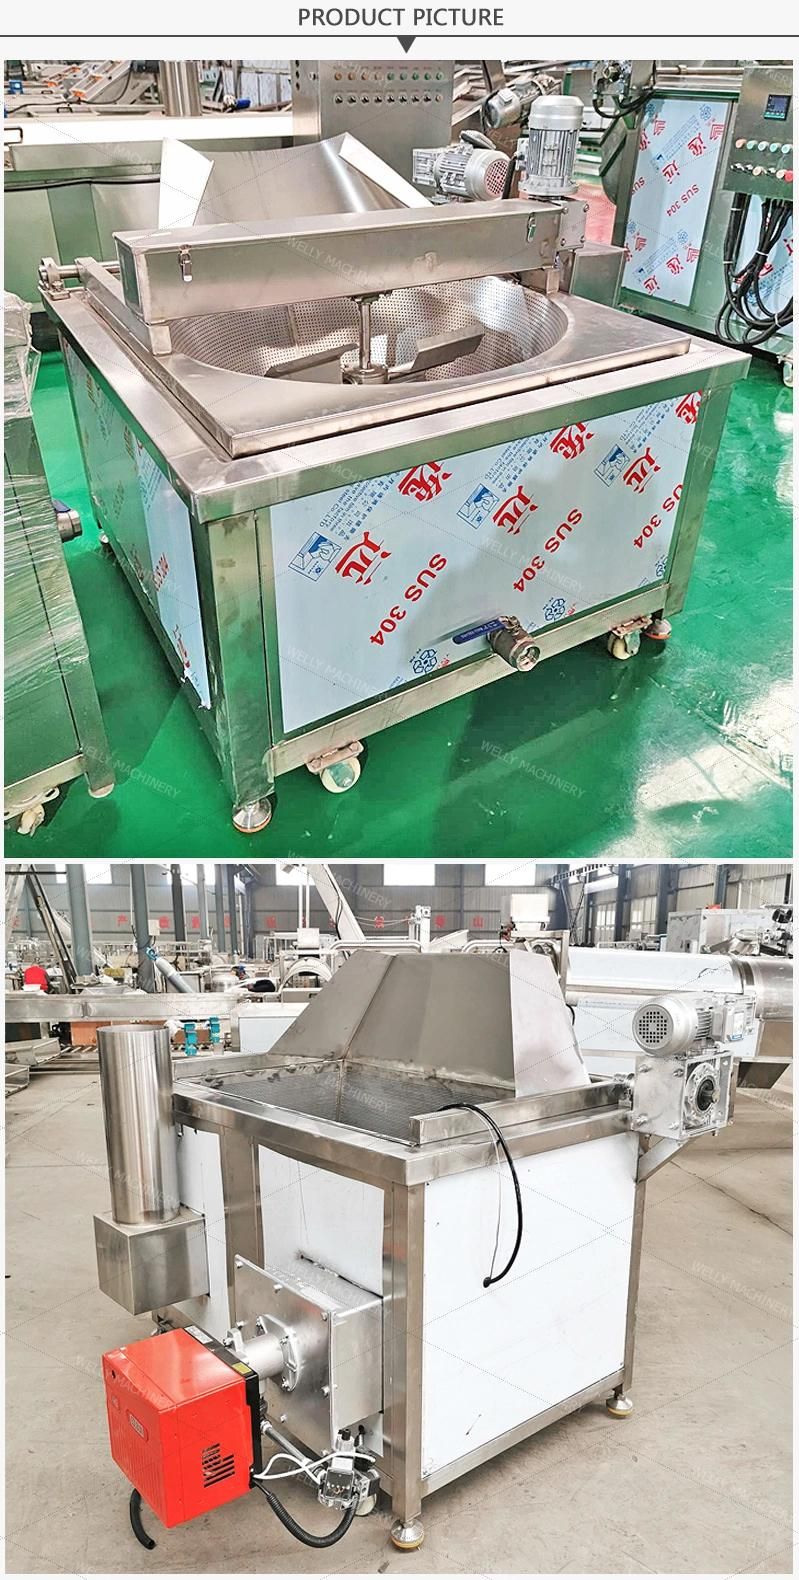 Automatic Lifting System Frying Machine for Chicken Peanut Frech Fries Chips Gas Deep Fryer LPG